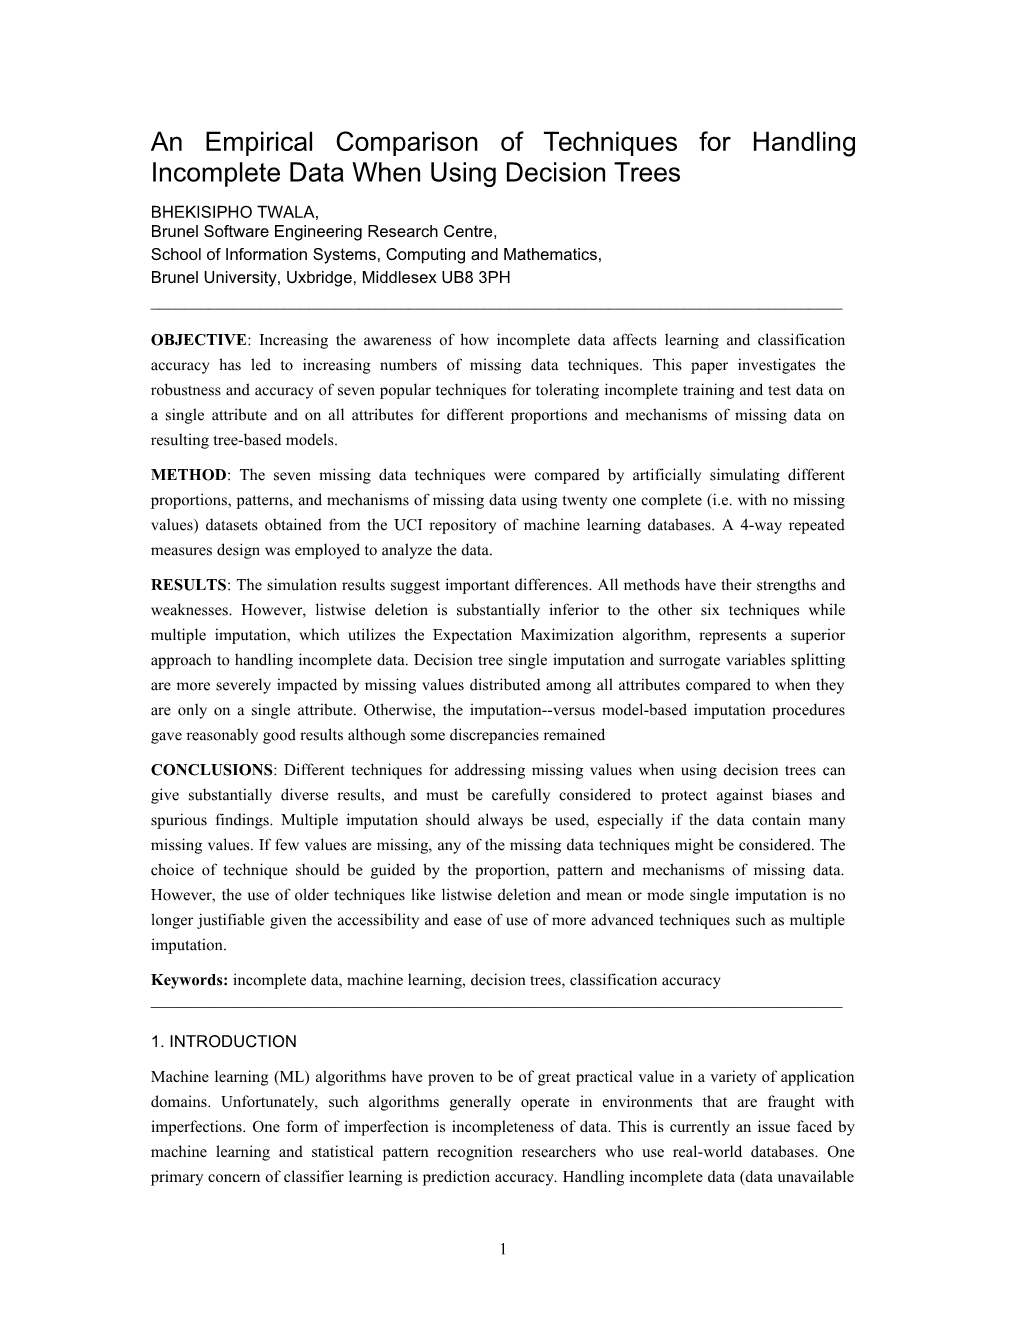 An Empirical Comparison of Methods for Handling Incomplete Data When Using Decision Trees